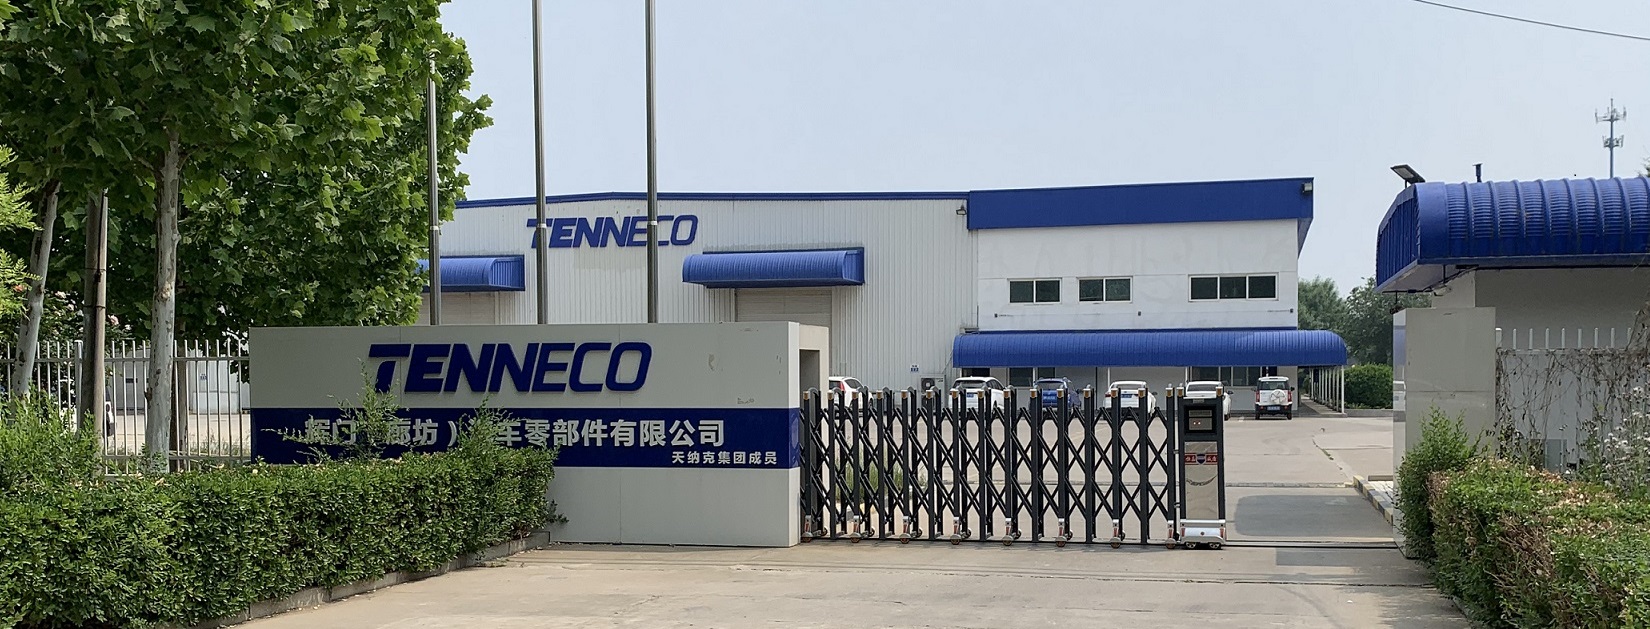 Tenneco Langfang Extension Project